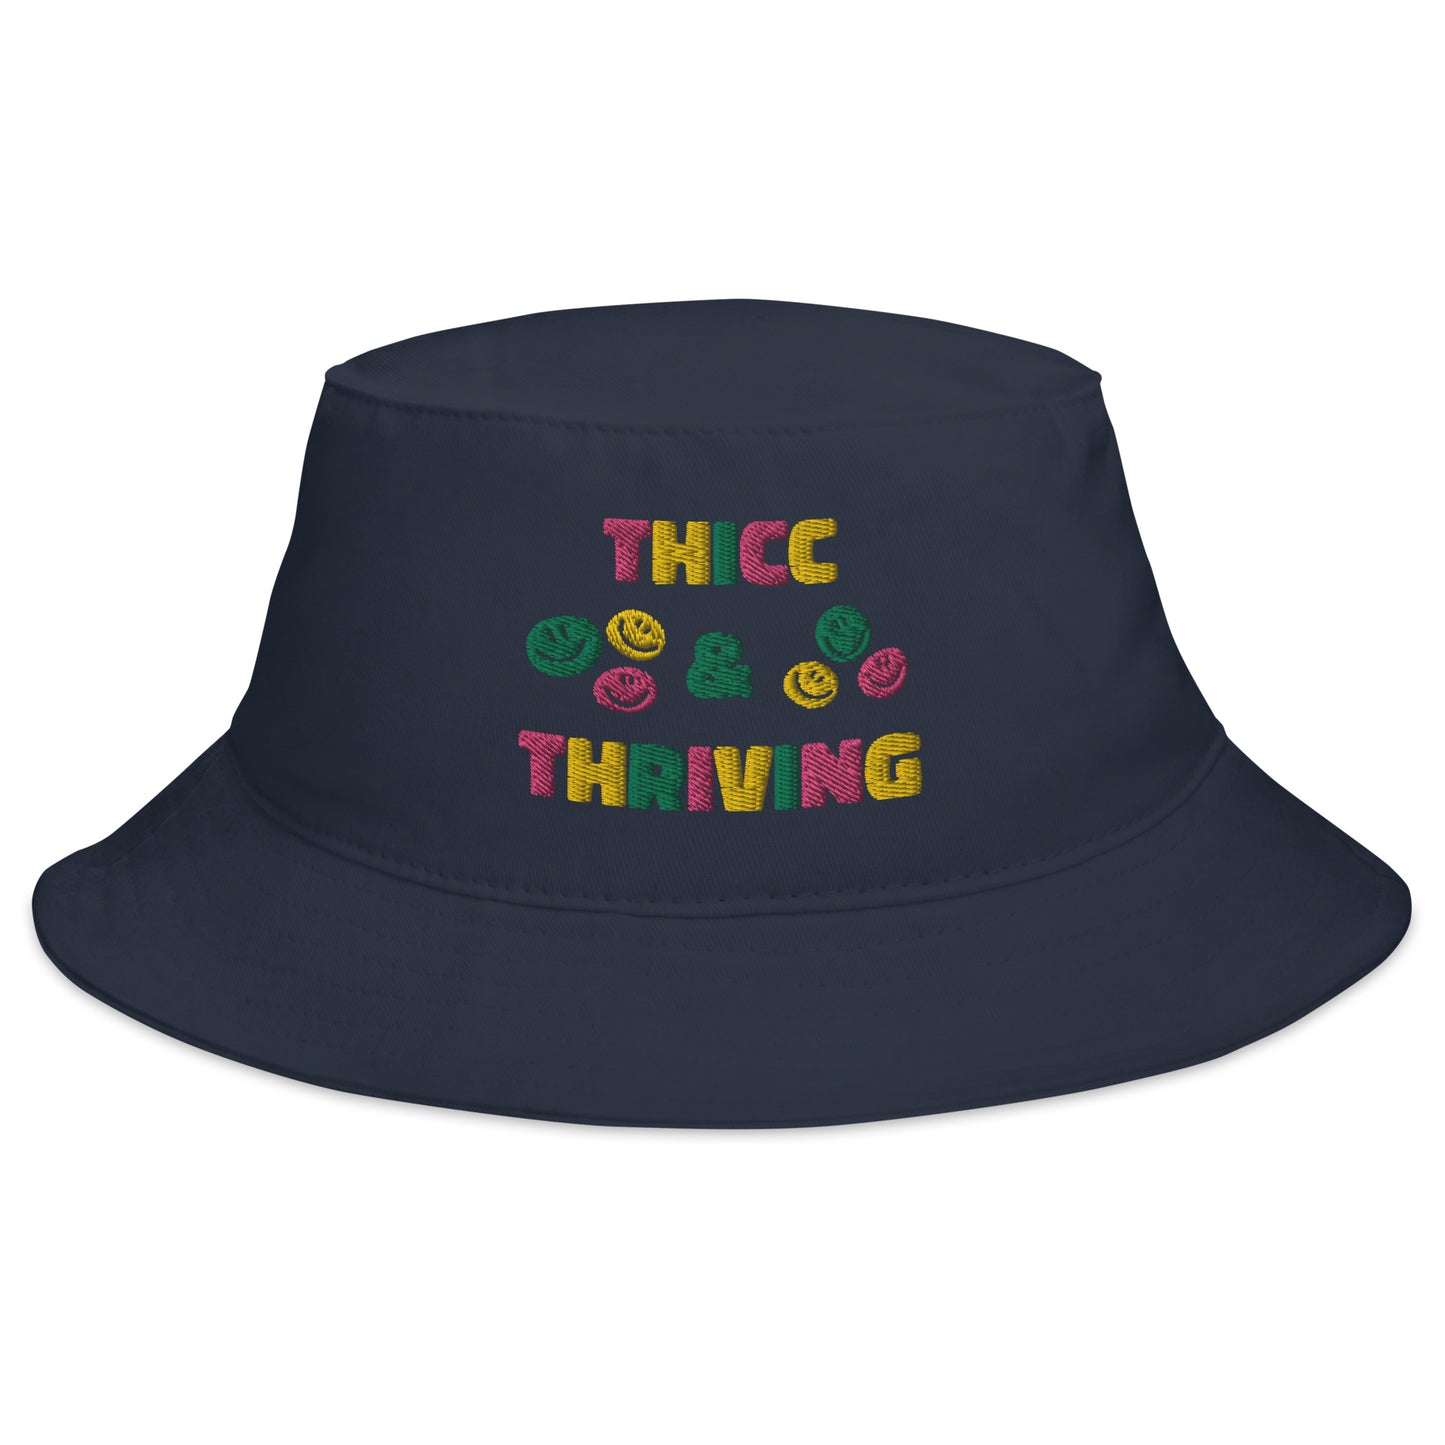 Thick & Thriving Bucket Hat